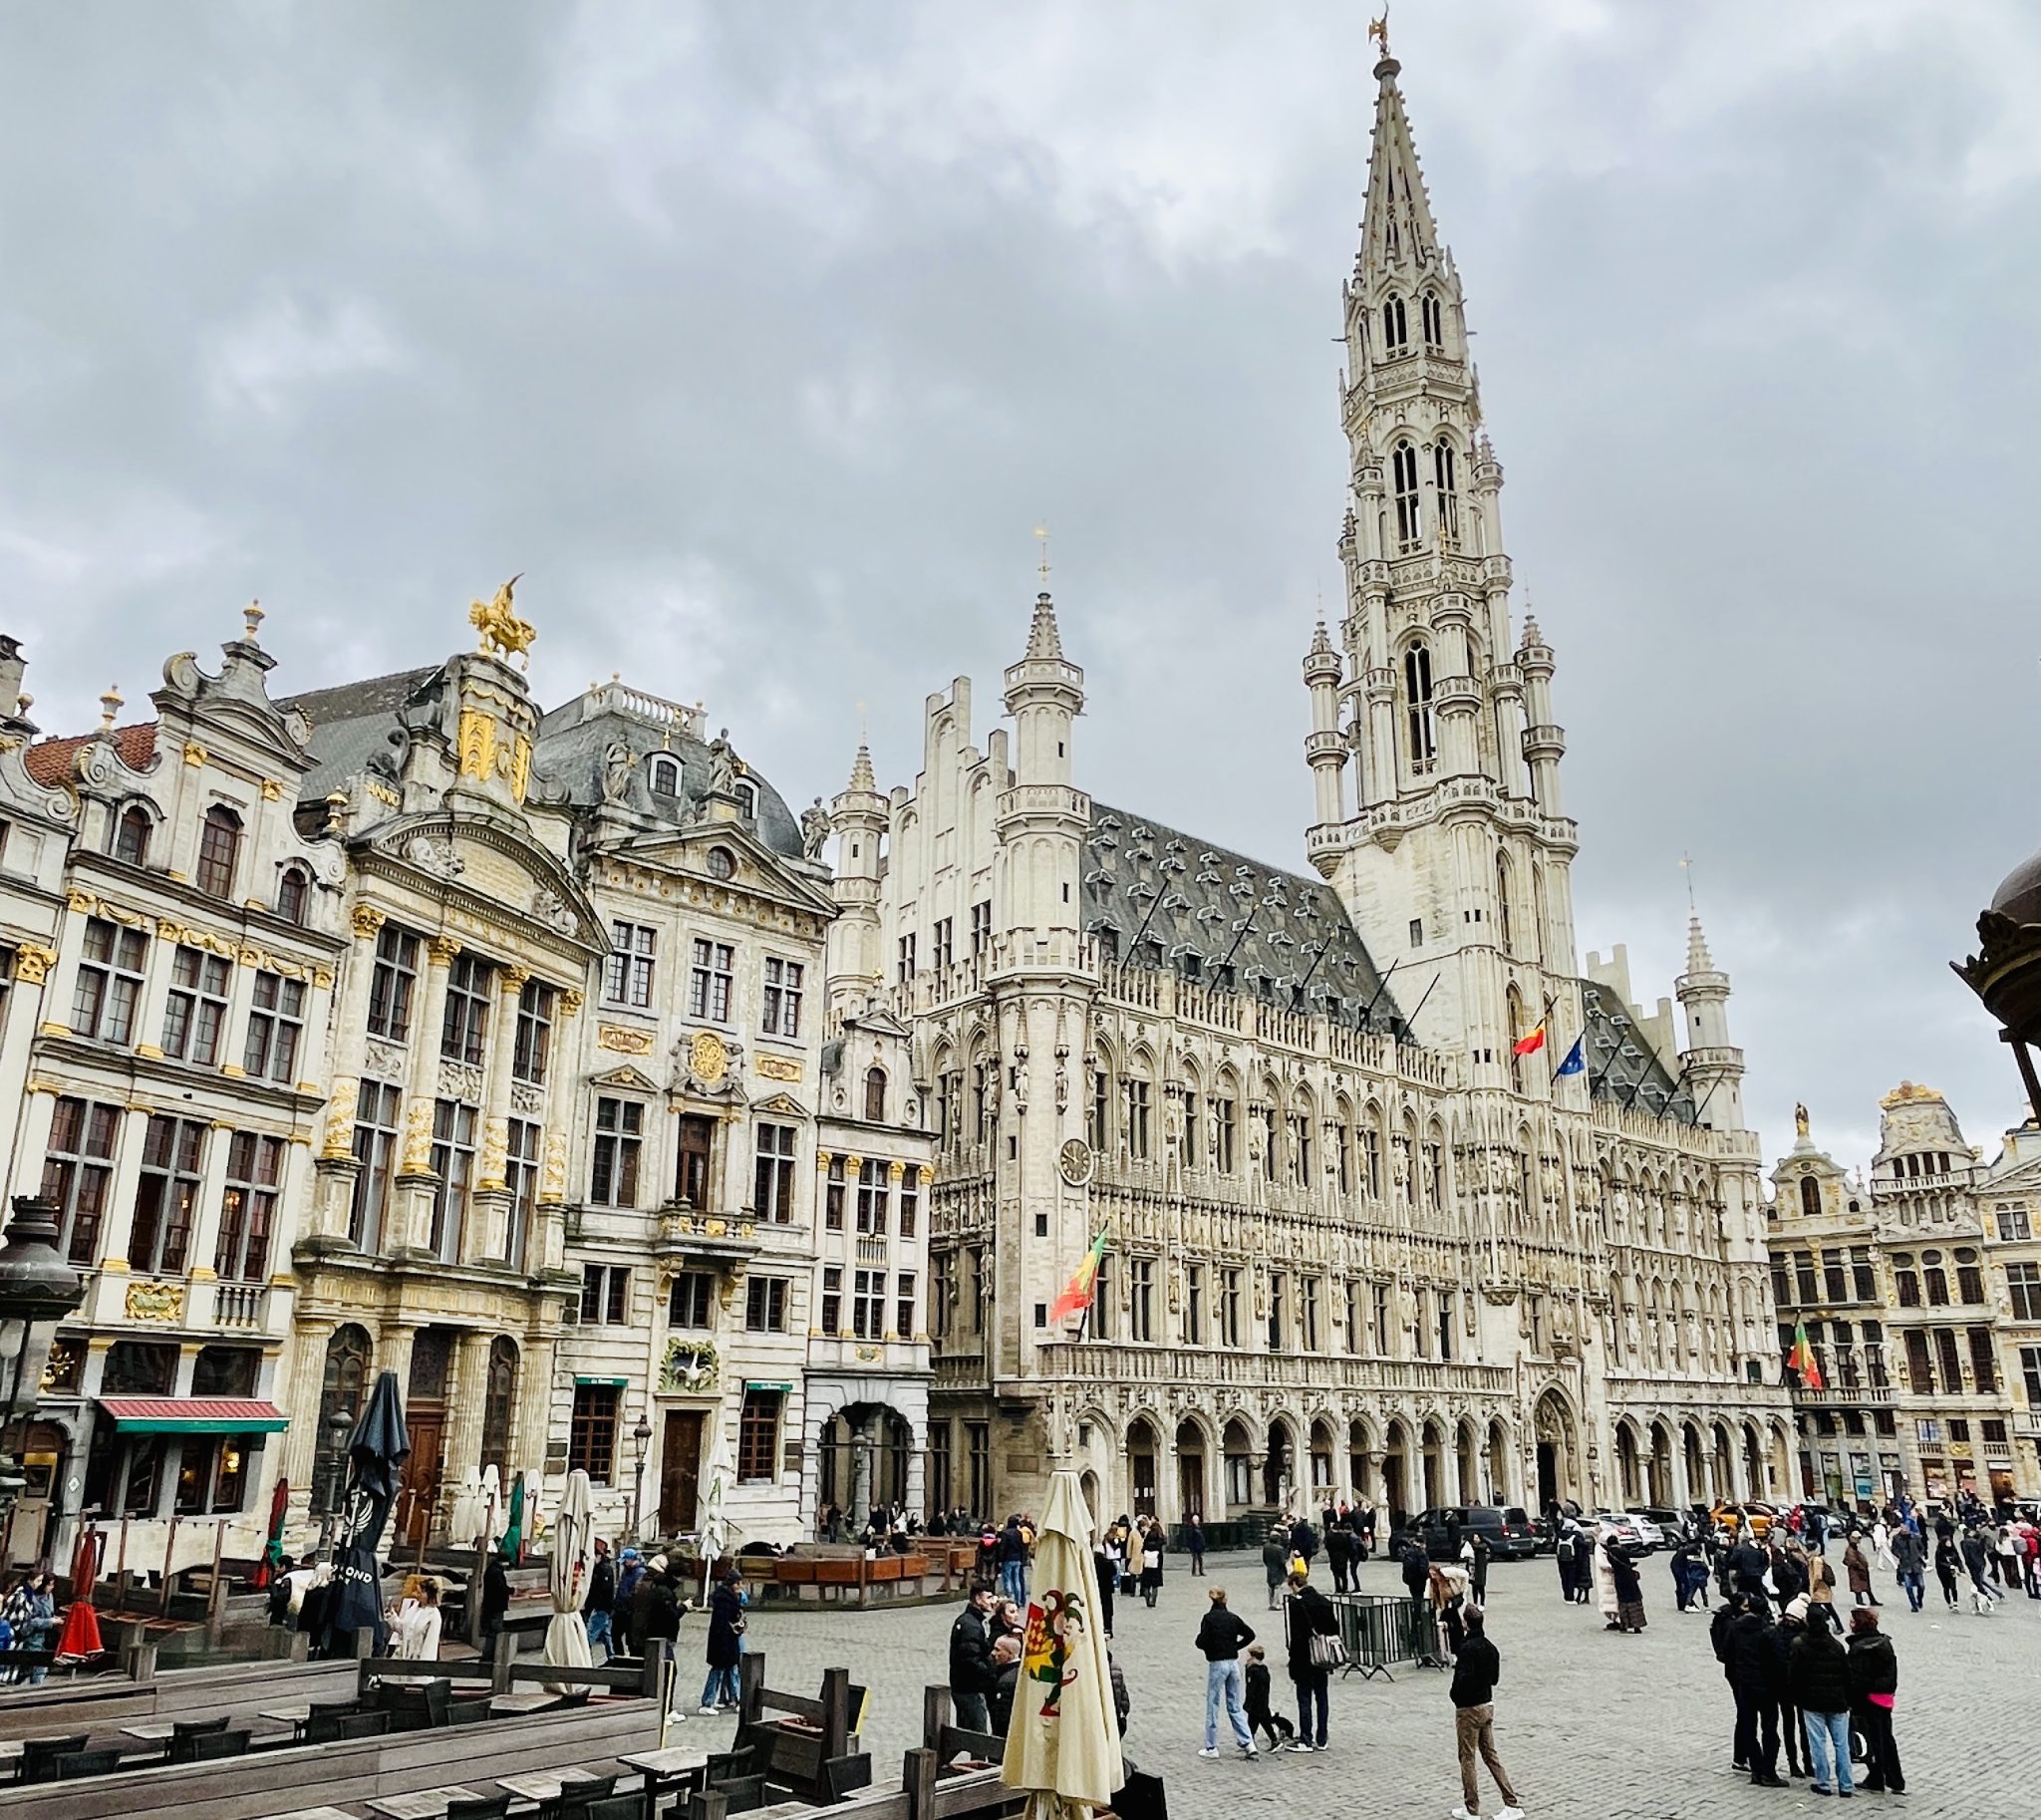 Grand Place in Belgium has stunning architecture